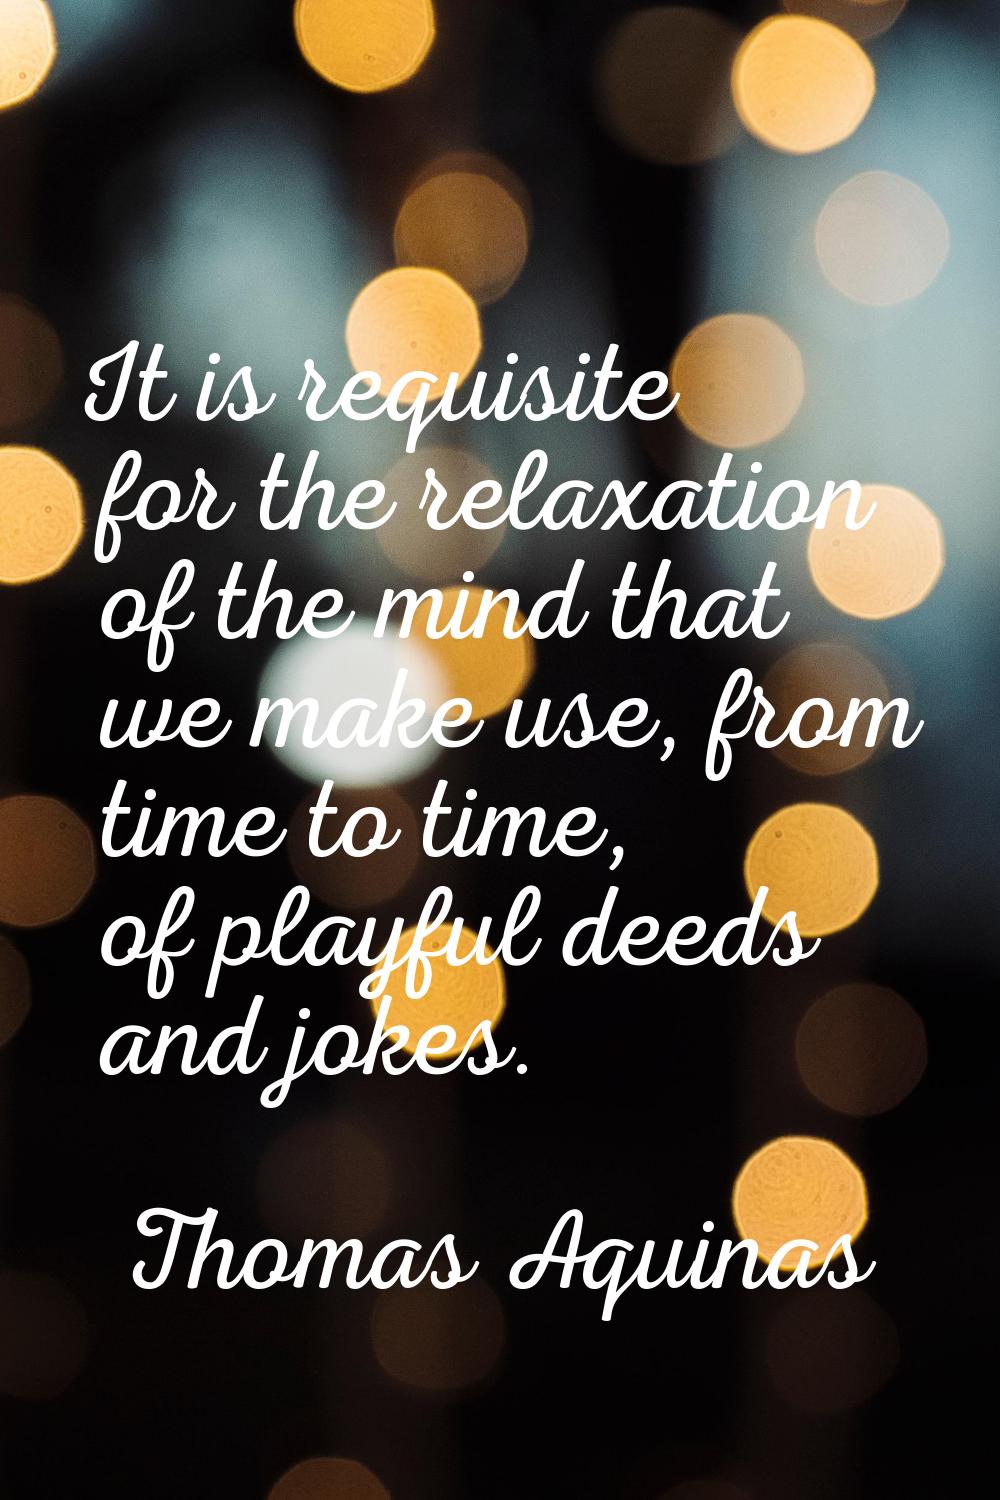 It is requisite for the relaxation of the mind that we make use, from time to time, of playful deed